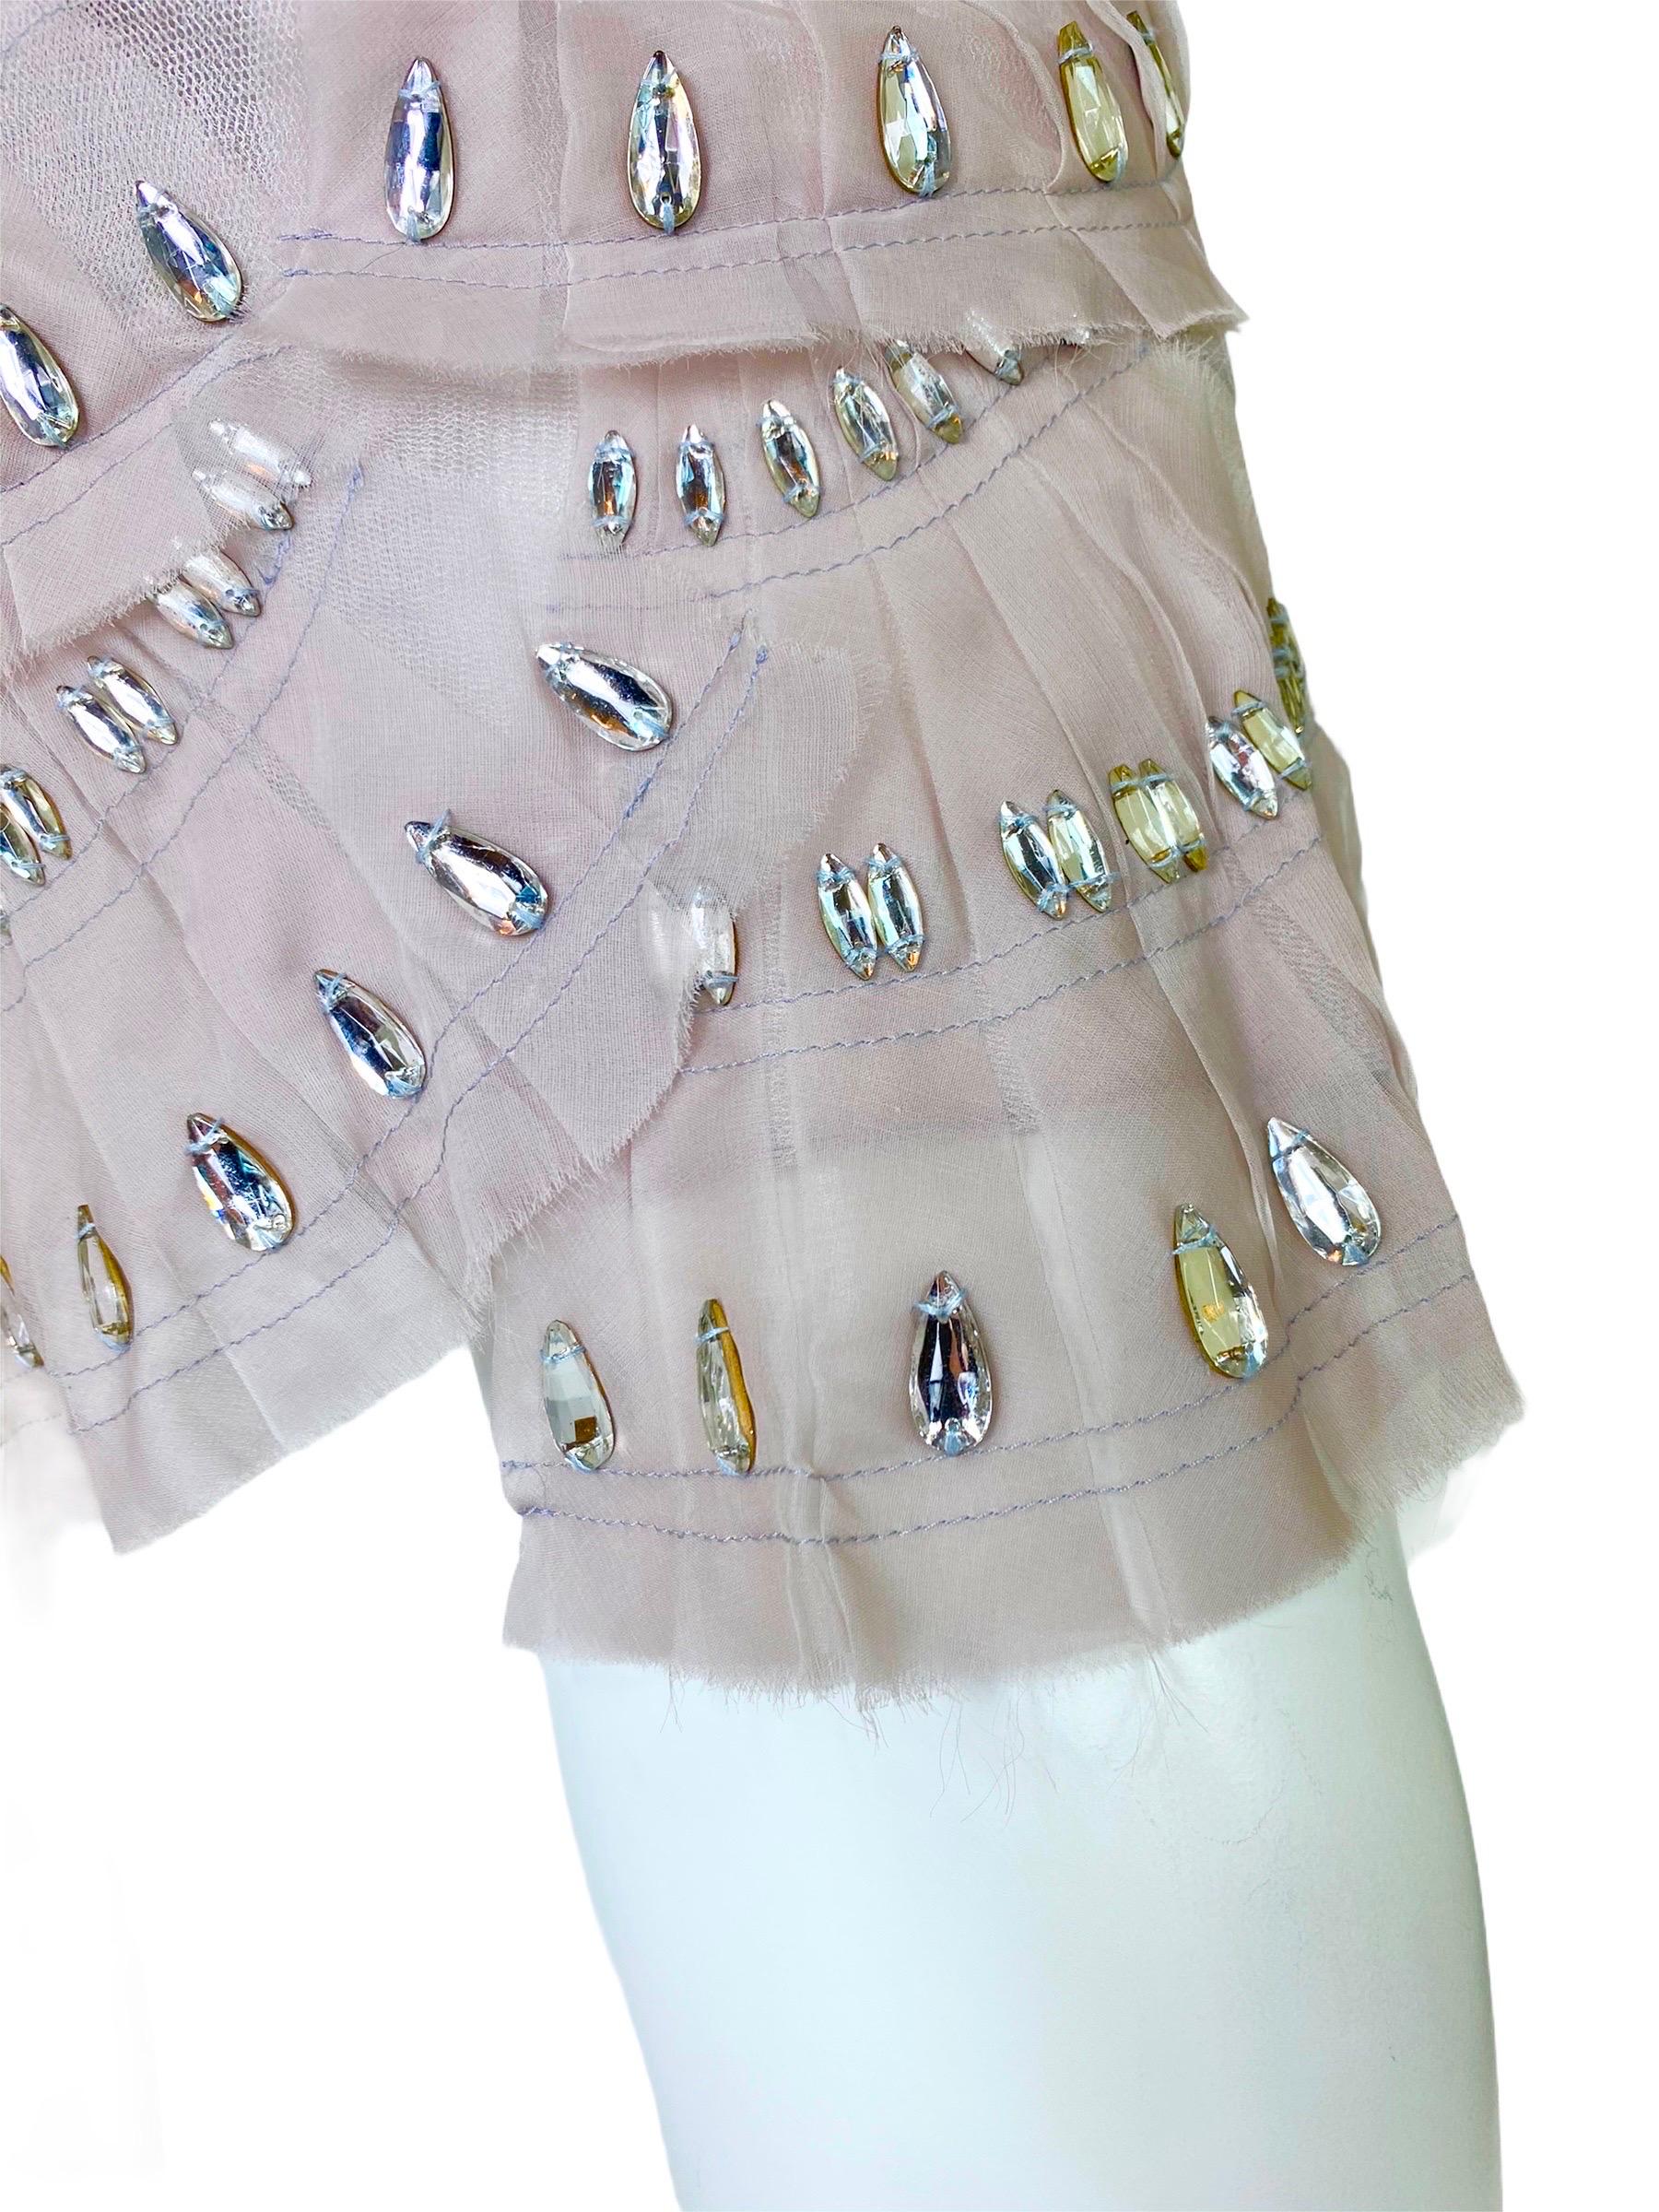 Women's S/S 2004 Vintage Tom Ford for Gucci Runway Crystal Embellished Skirt Size 40 NWT For Sale